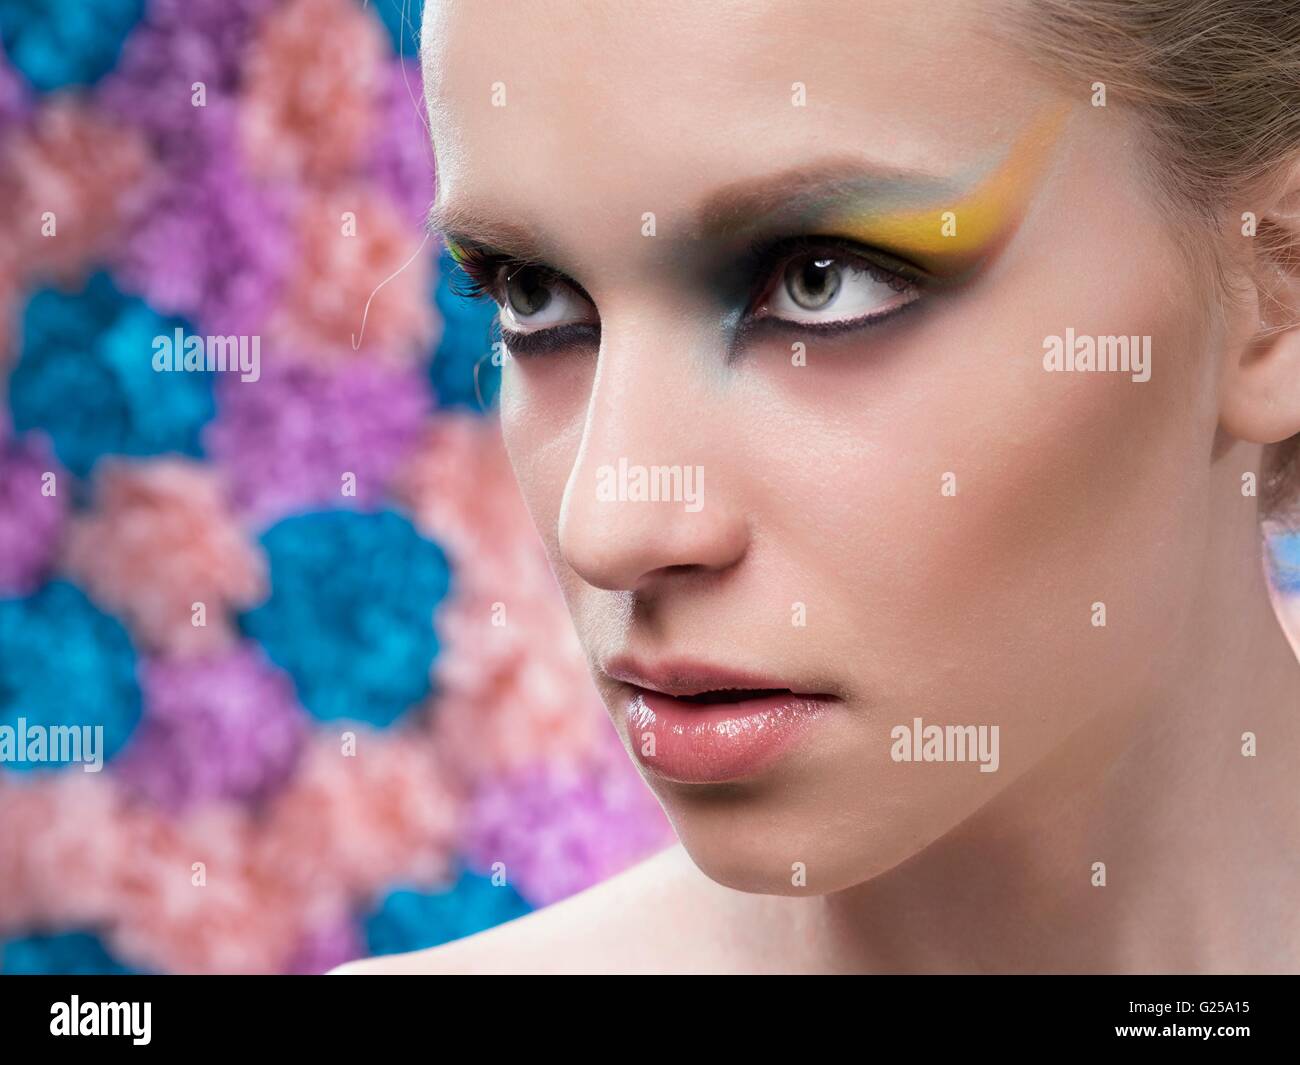 Portrait of a model wearing dramatic eye shadow make-up Stock Photo